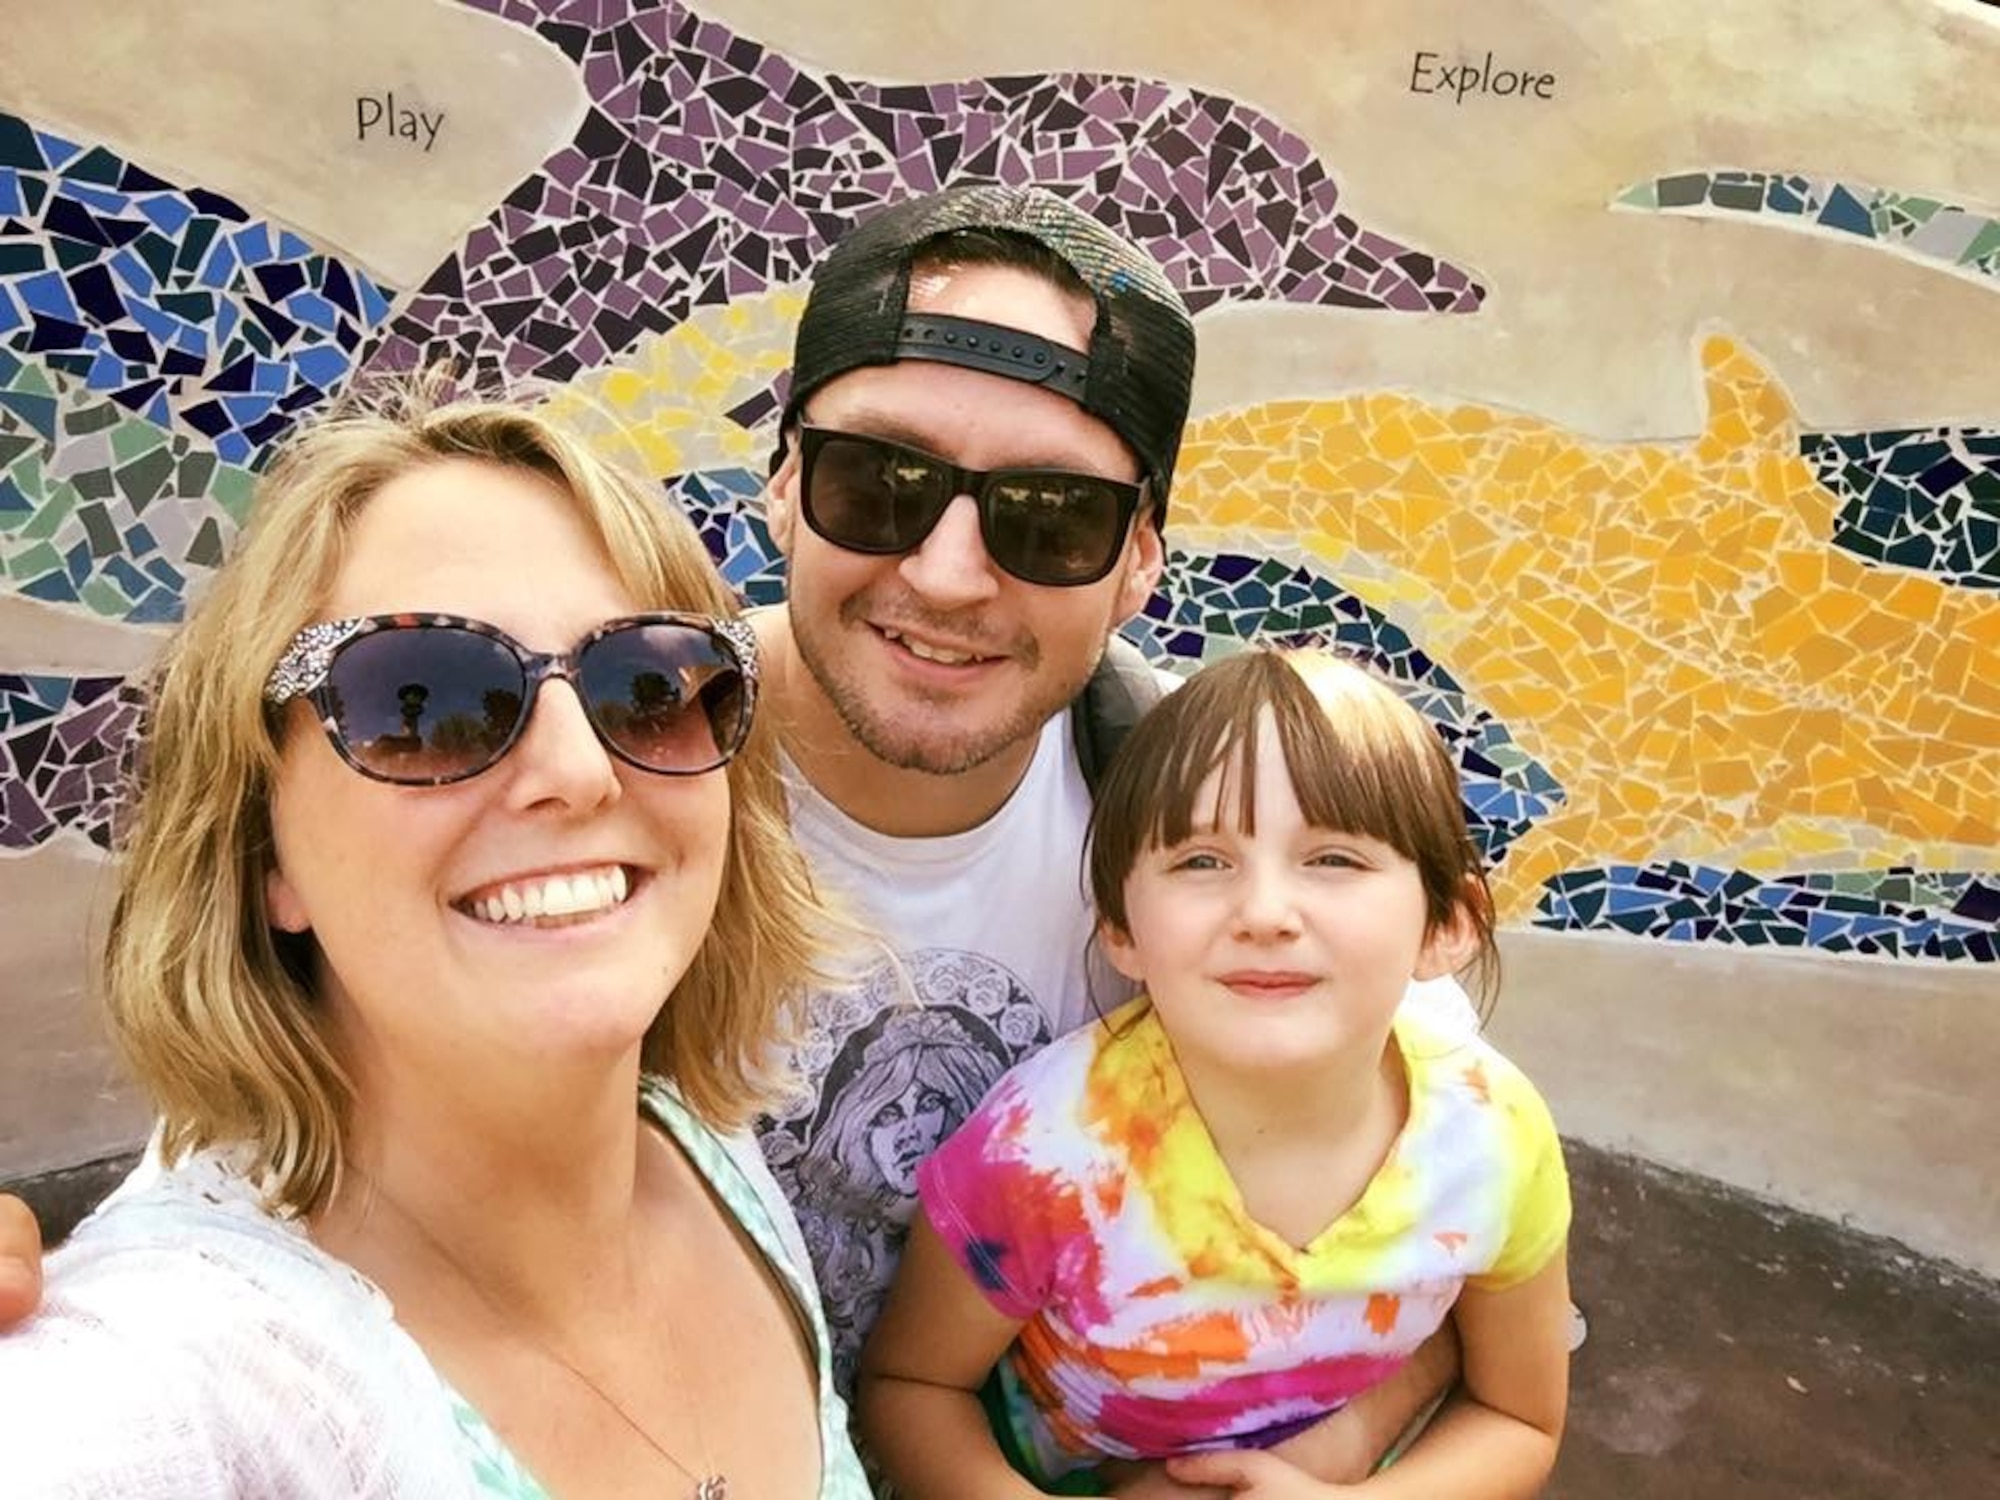 The Rojas family on vacation at Seaworld, August, 2017.